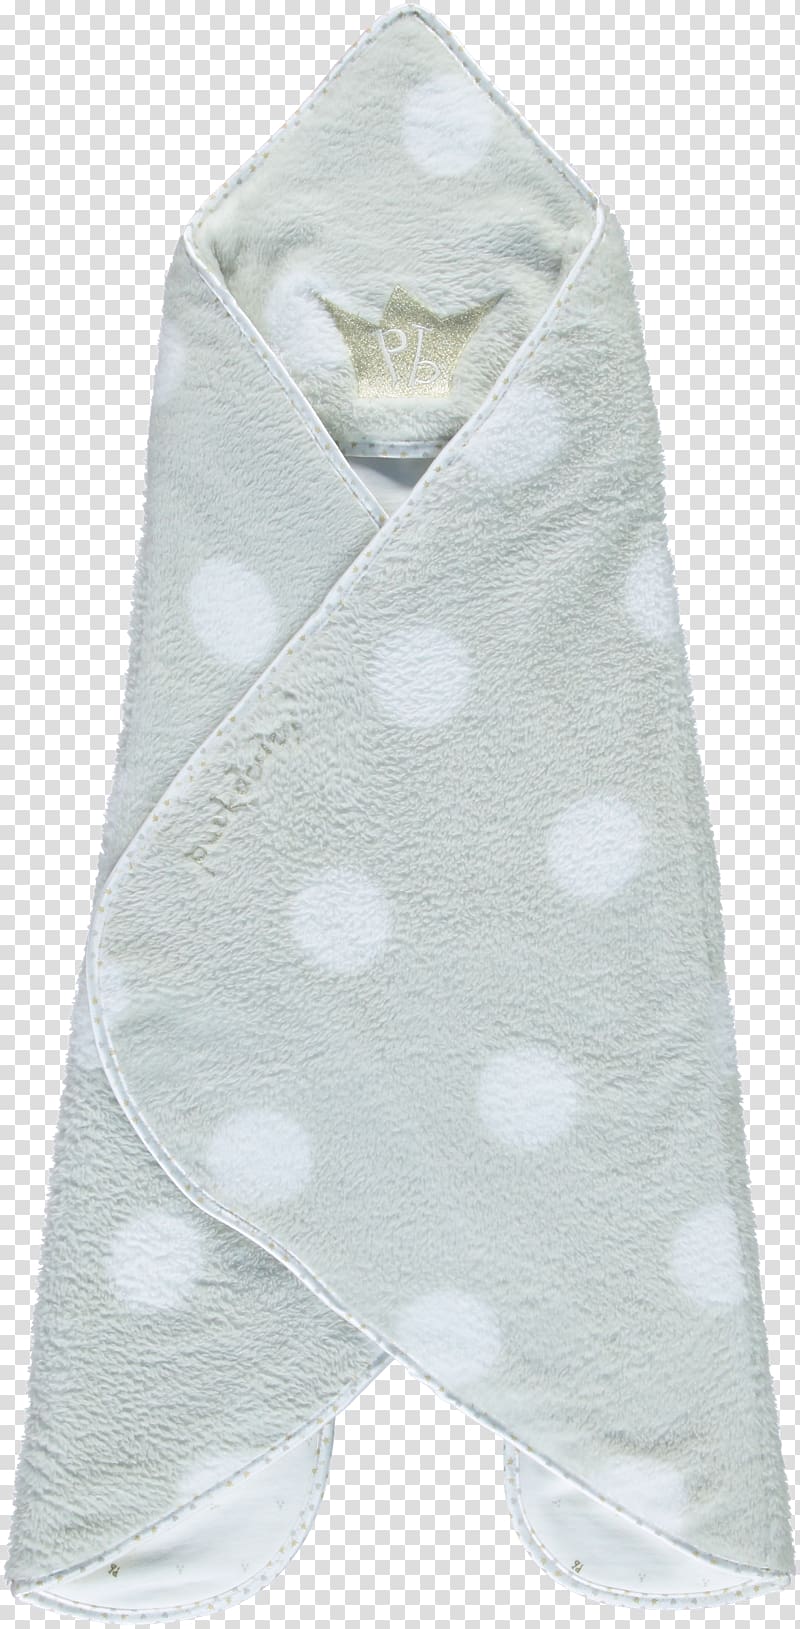 Puckababy Gogo New-born Teddy Wrapping Blanket Infant Puckababy The Gogo Puckababy Bag Newborn Sleeping Bag White Dotty Sleeping Bags, gold dot transparent background PNG clipart